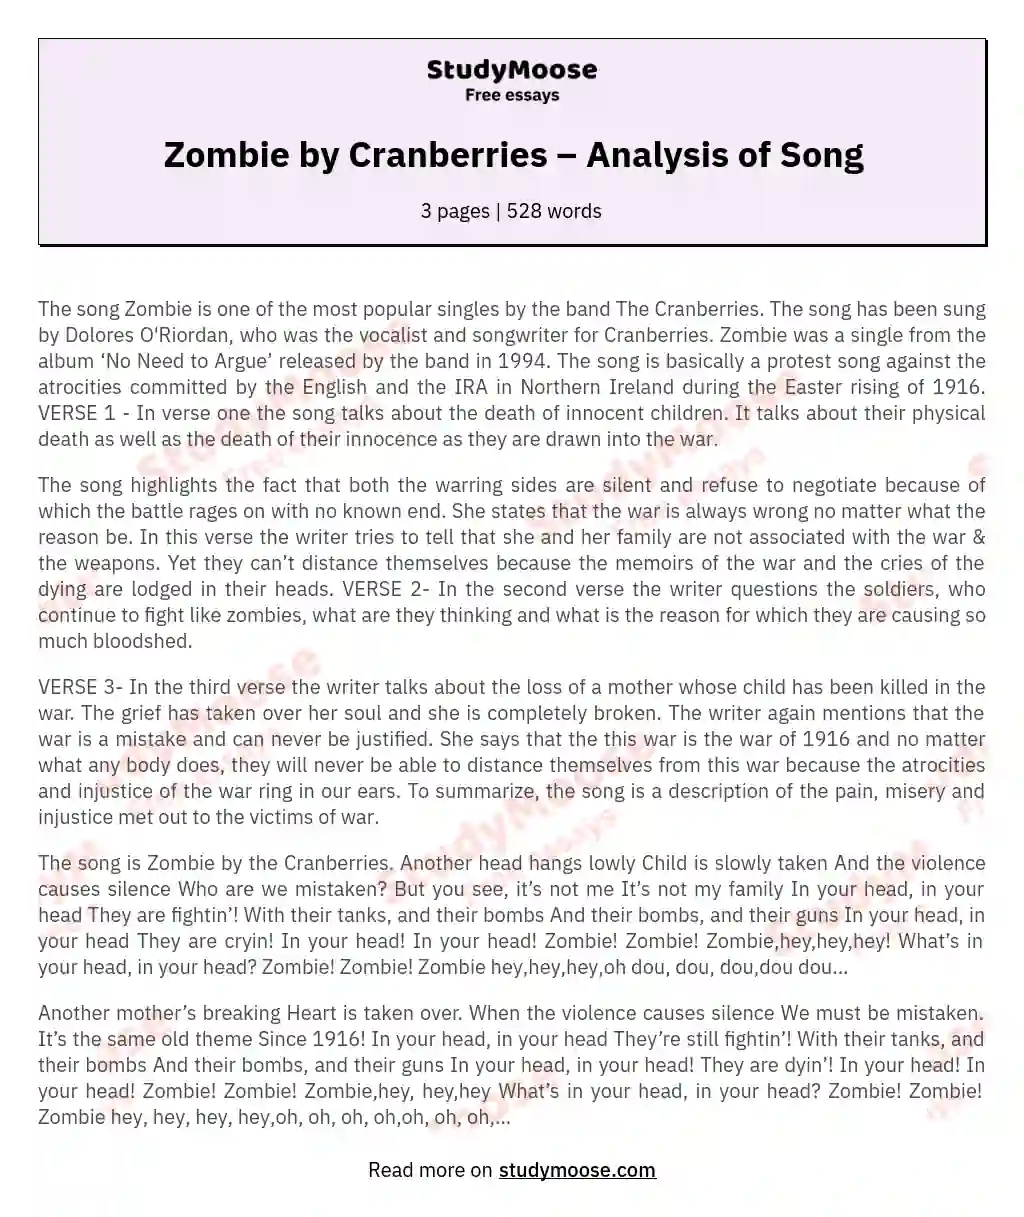 Zombie by Cranberries – Analysis of Song essay